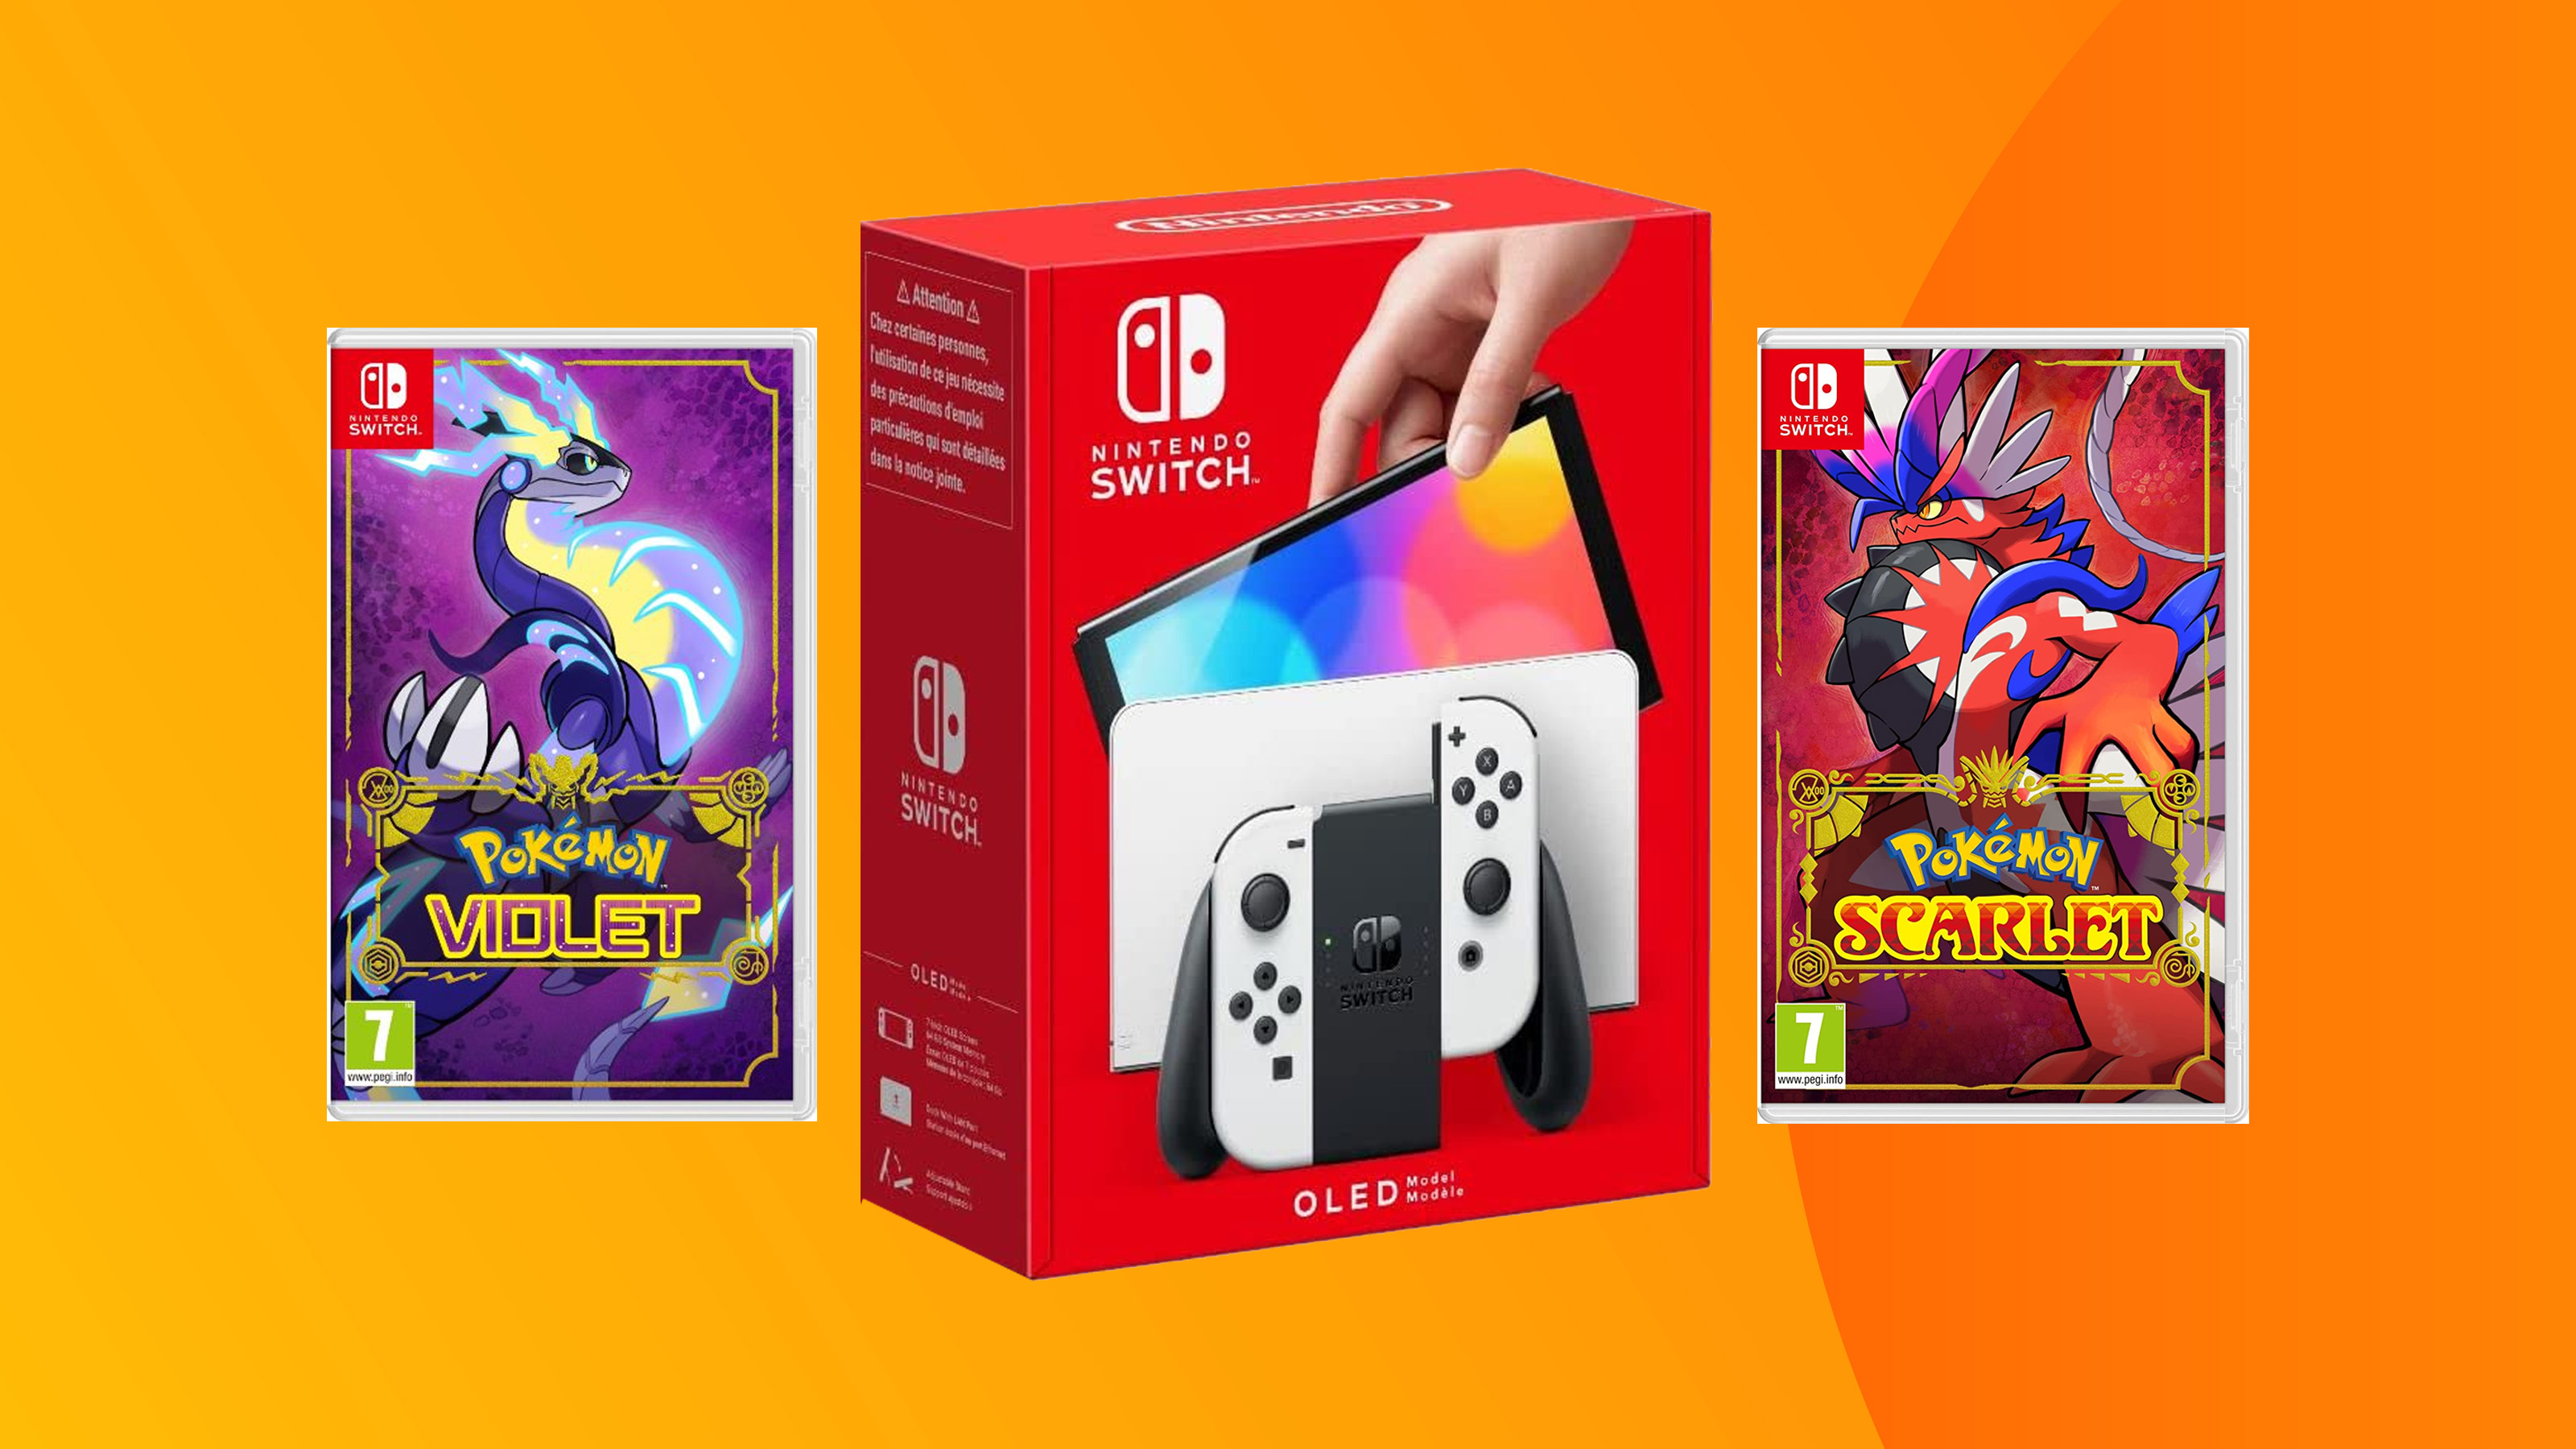 A product image of the Switch OLED console and Pokemon games on a colorful background